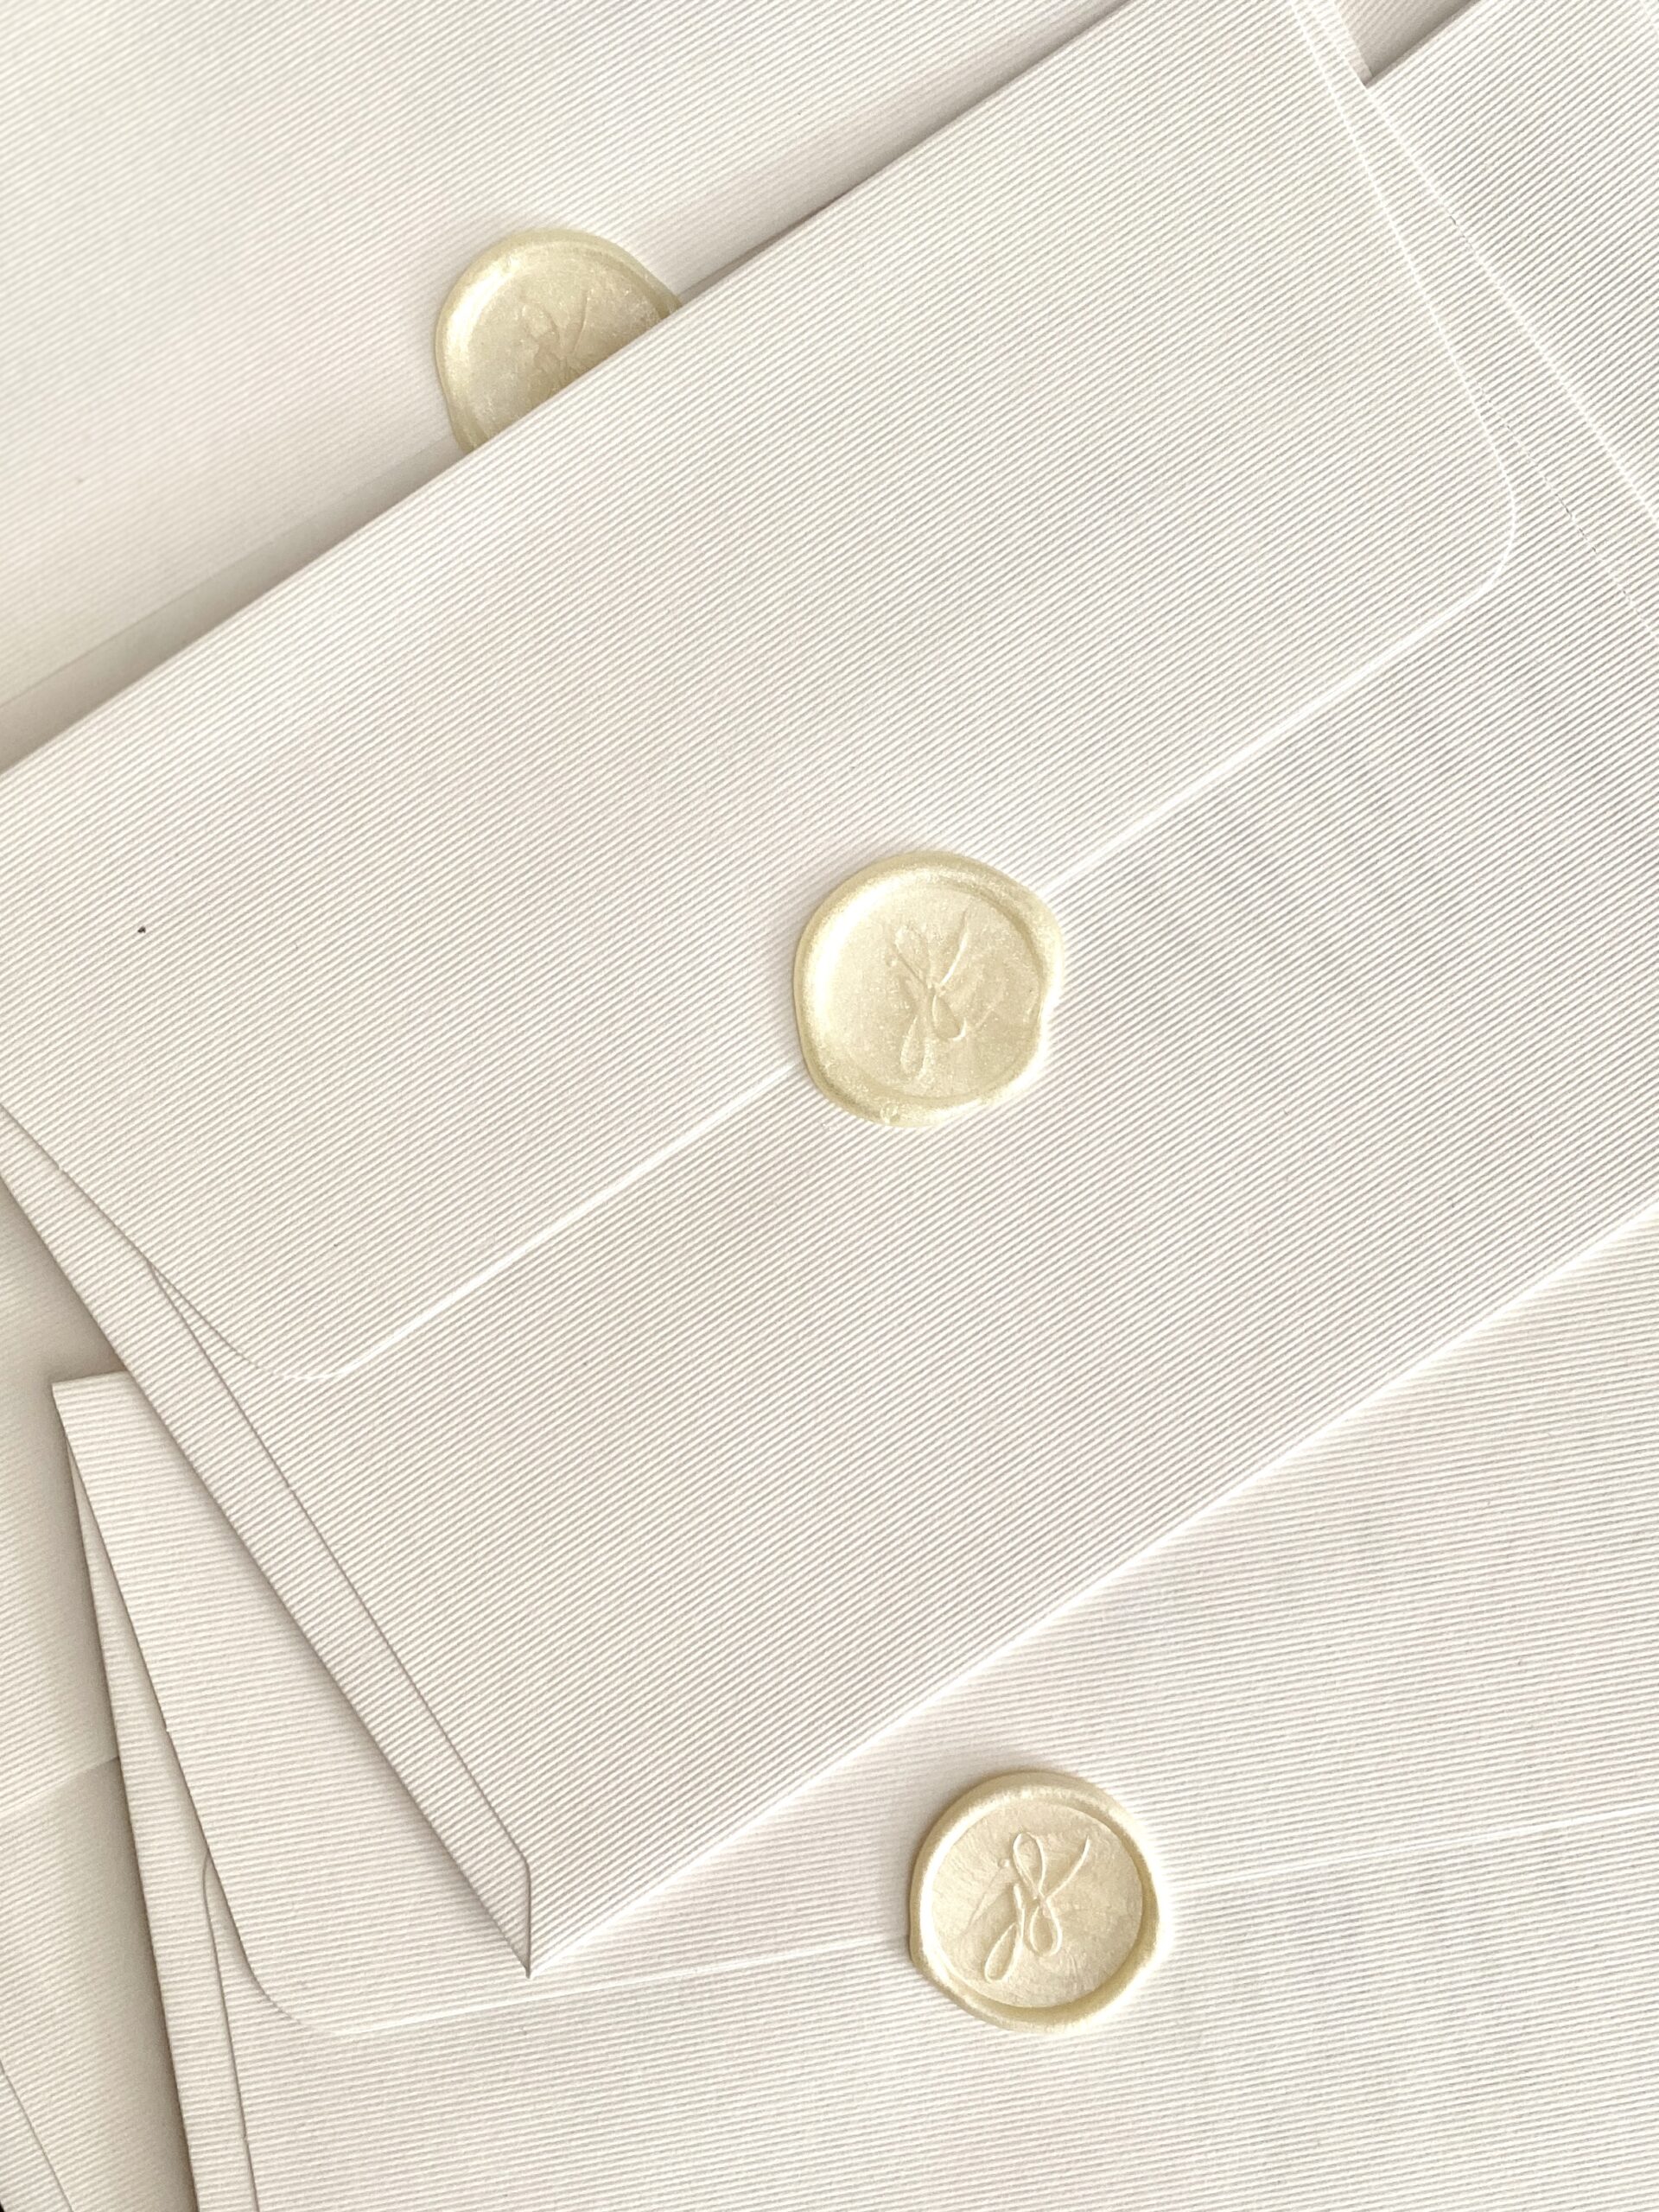 the-dreamers-wedding-and-baptism-invitation-envelope-with-sealing-wax